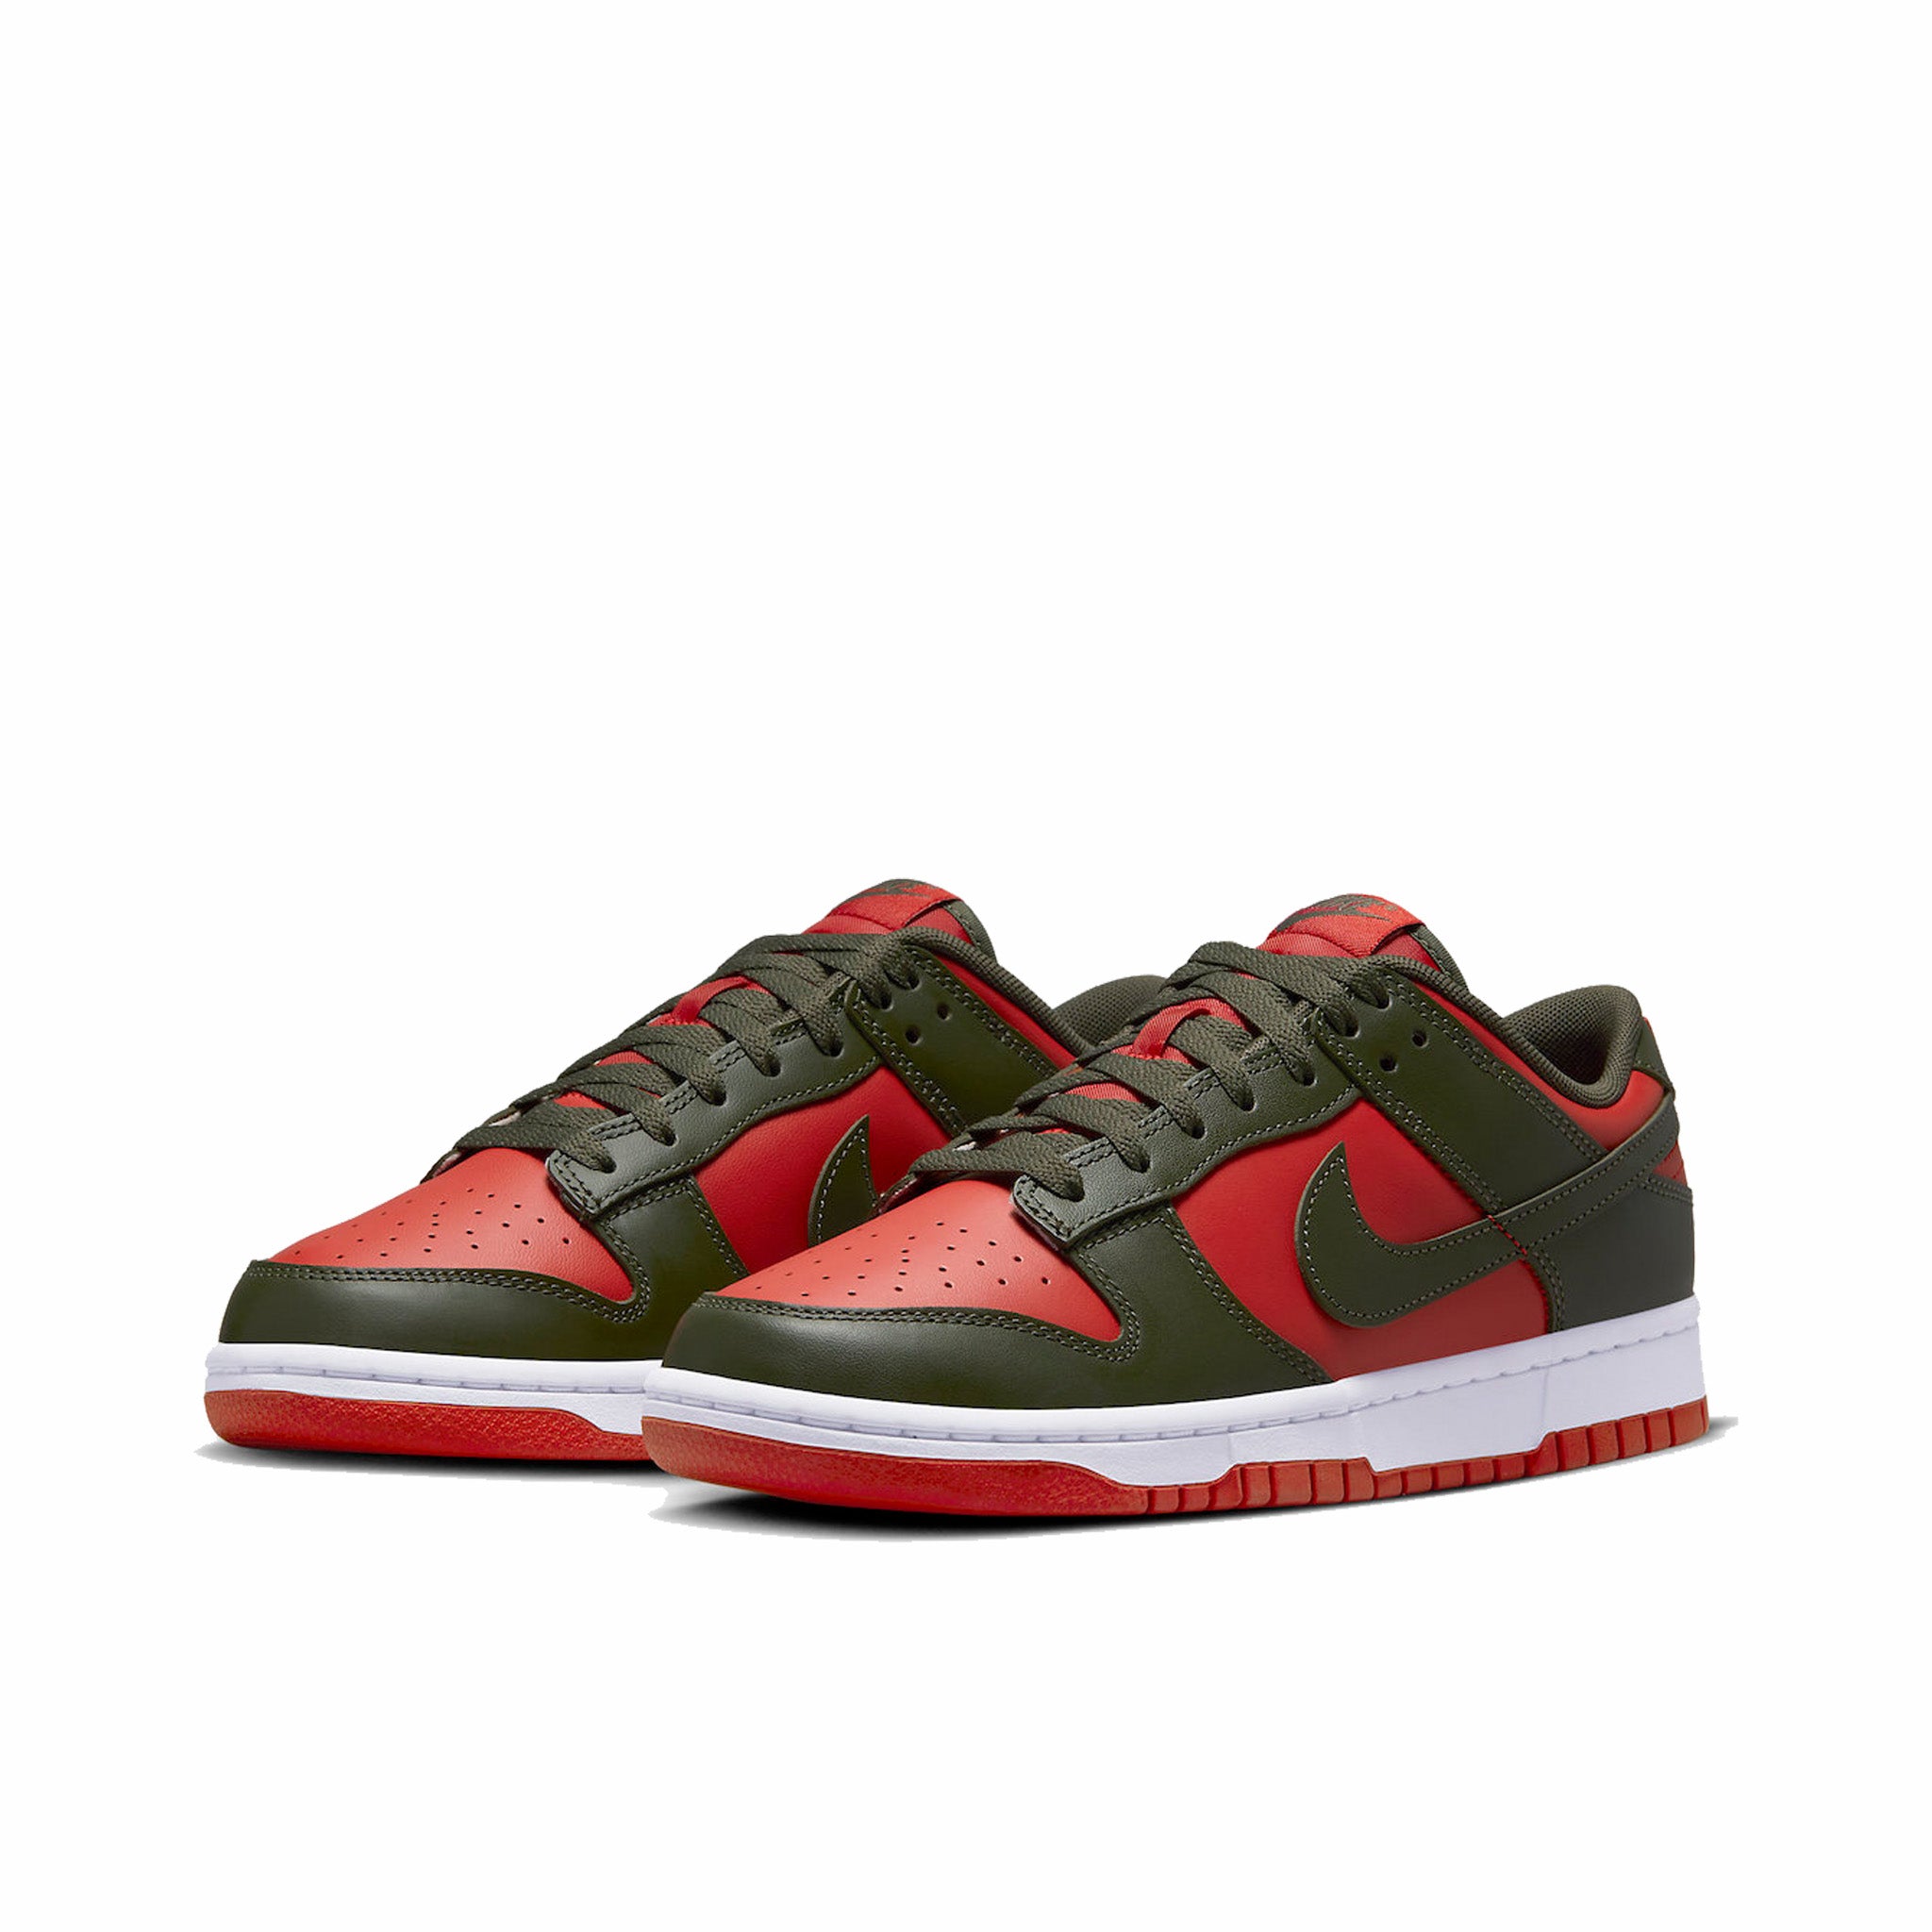 Nike Dunk Low Retro BTTYS “Mystic Red” (Mystic Red/Cargo Khaki-White) - August Shop